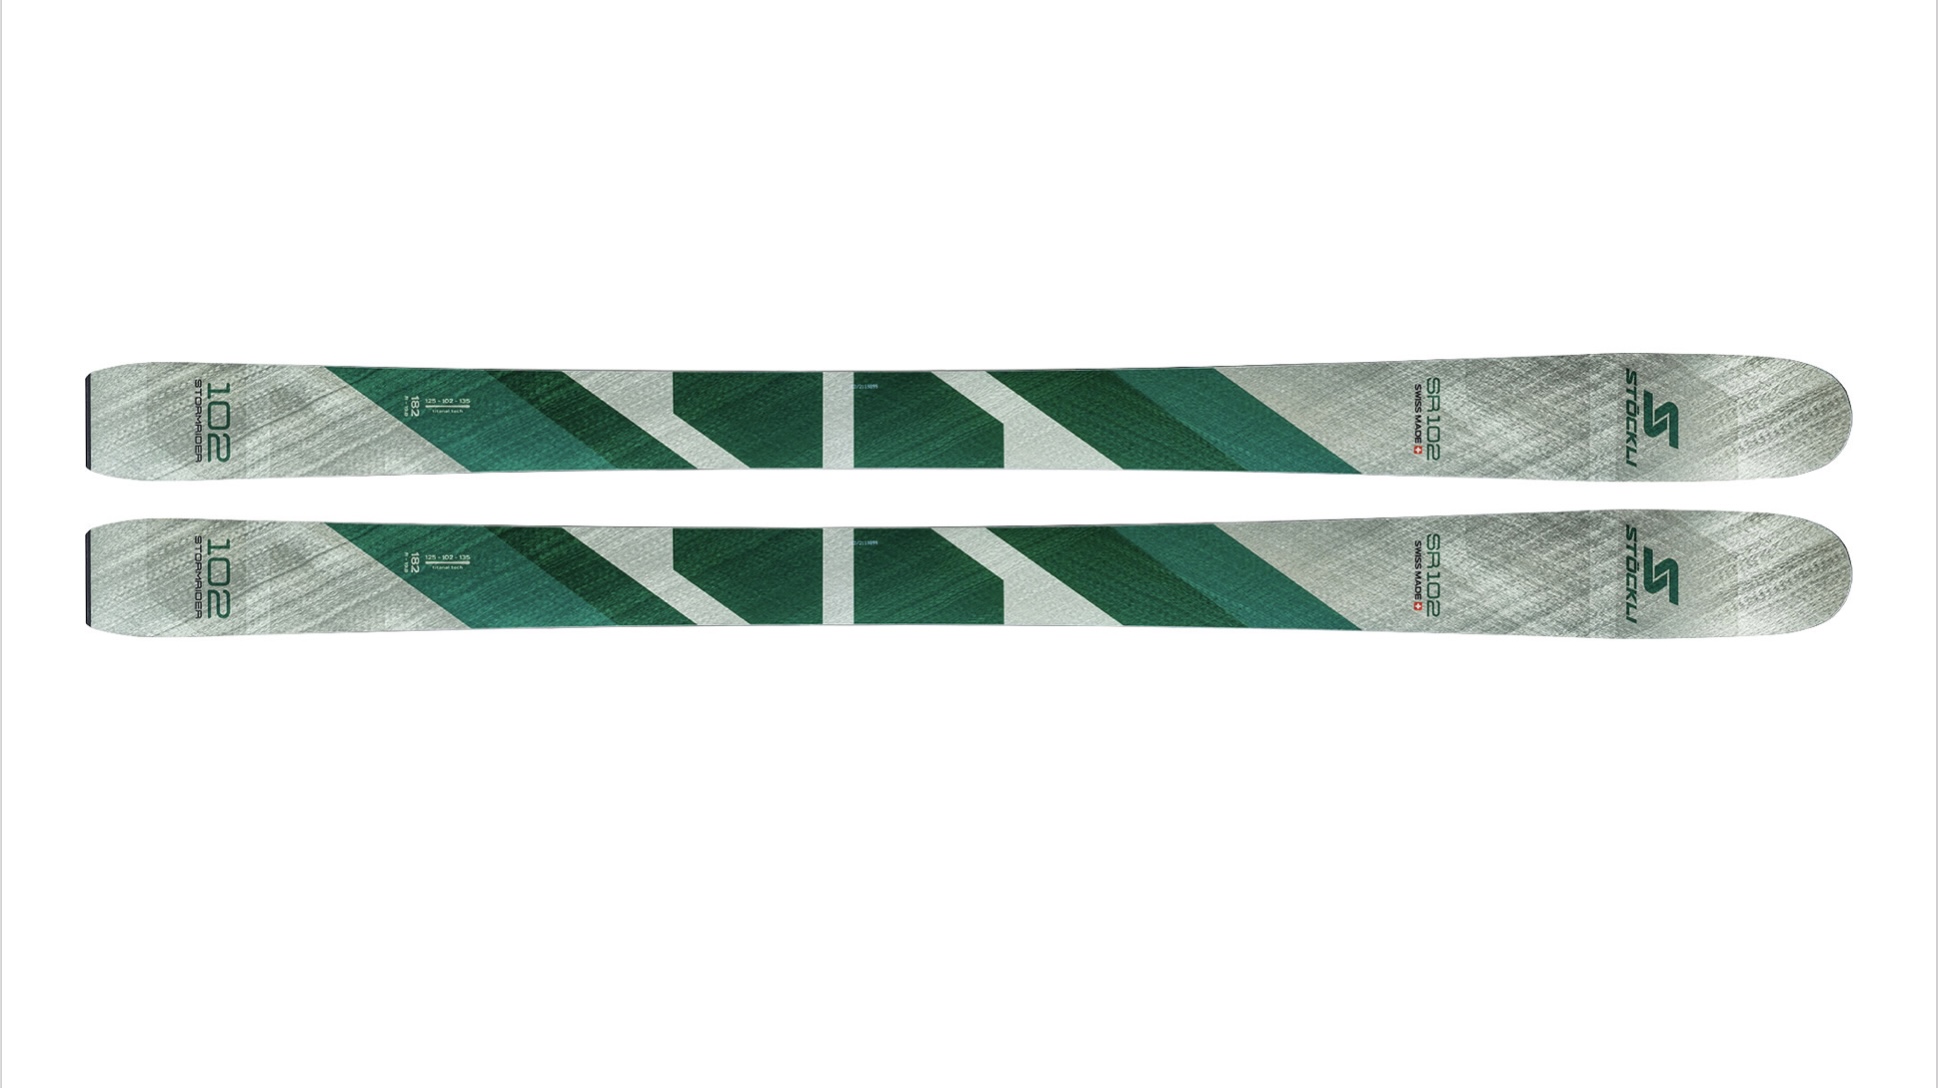 This 20 Minute Video About One Pair Of Skis (The Stöckli Stormrider 105) Is A Great Watch